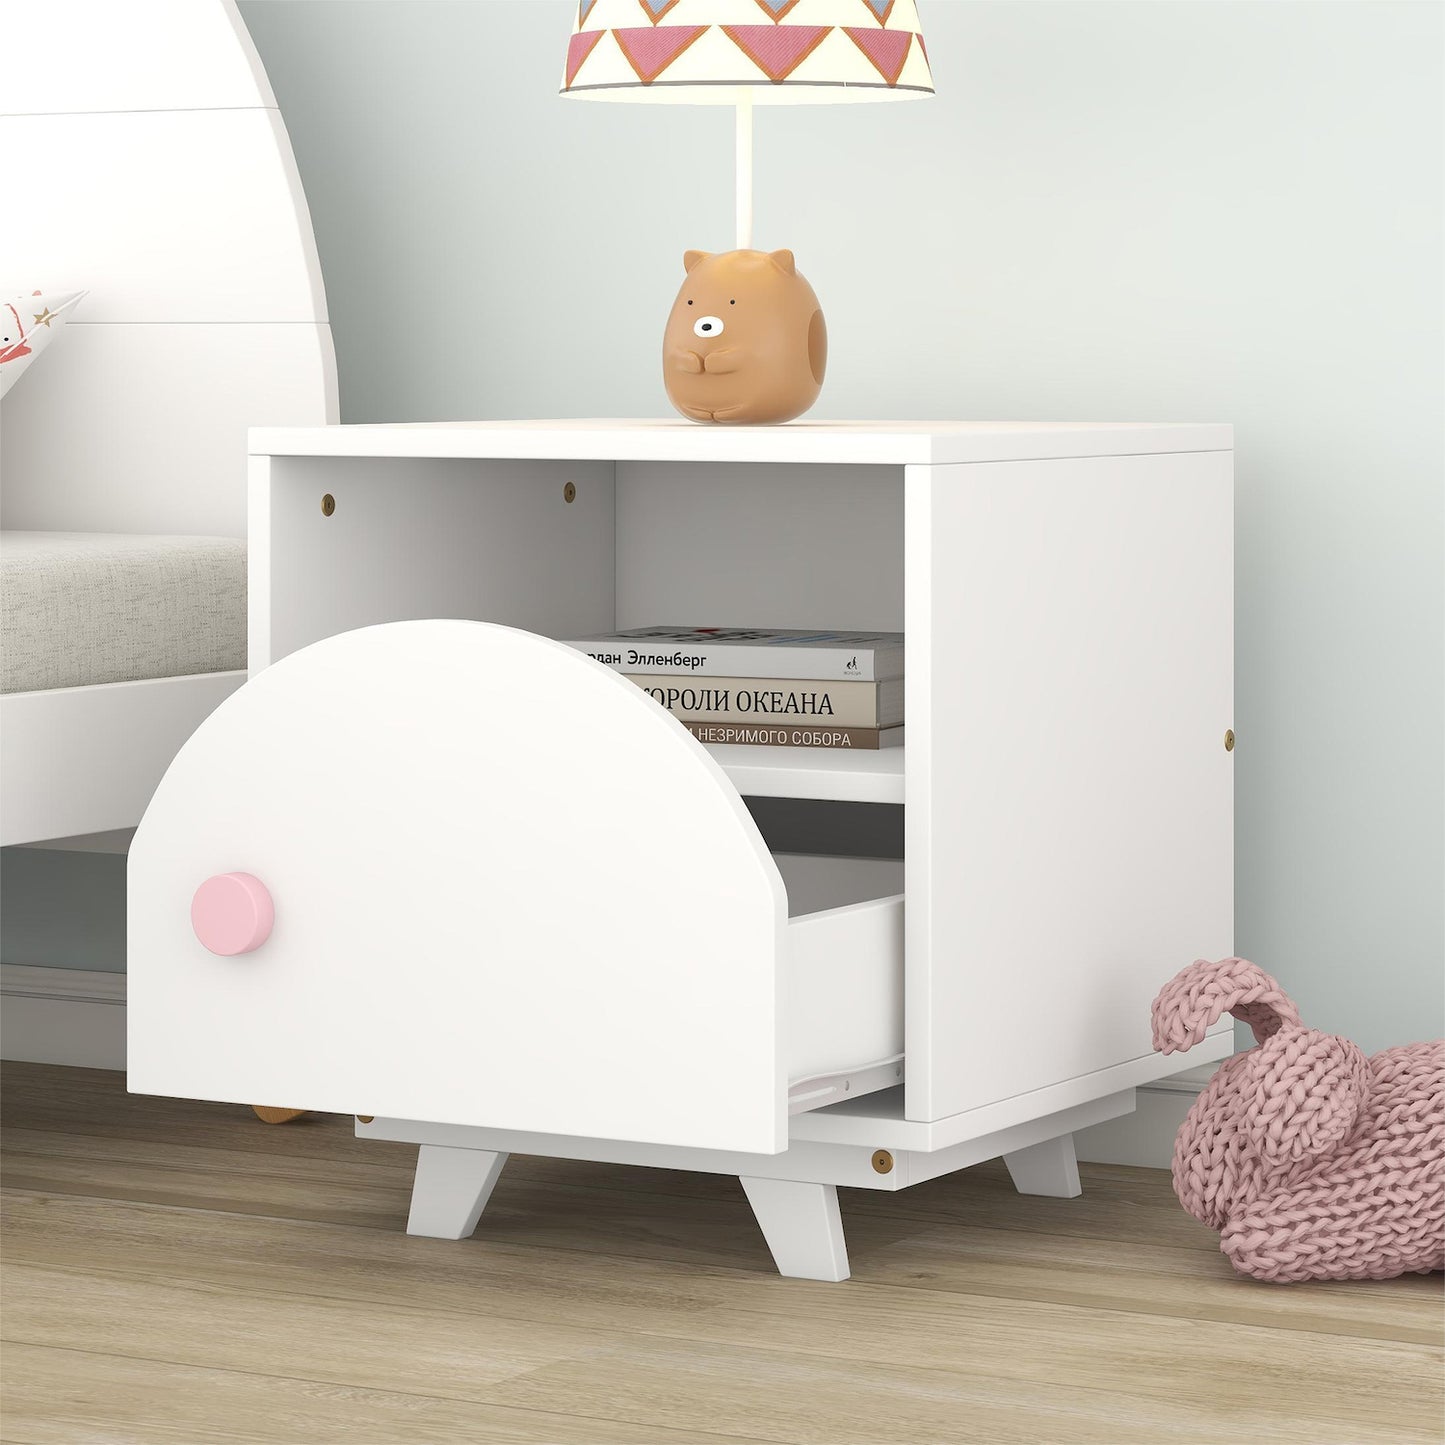 Homey Life Wooden Nightstand - White & Pink